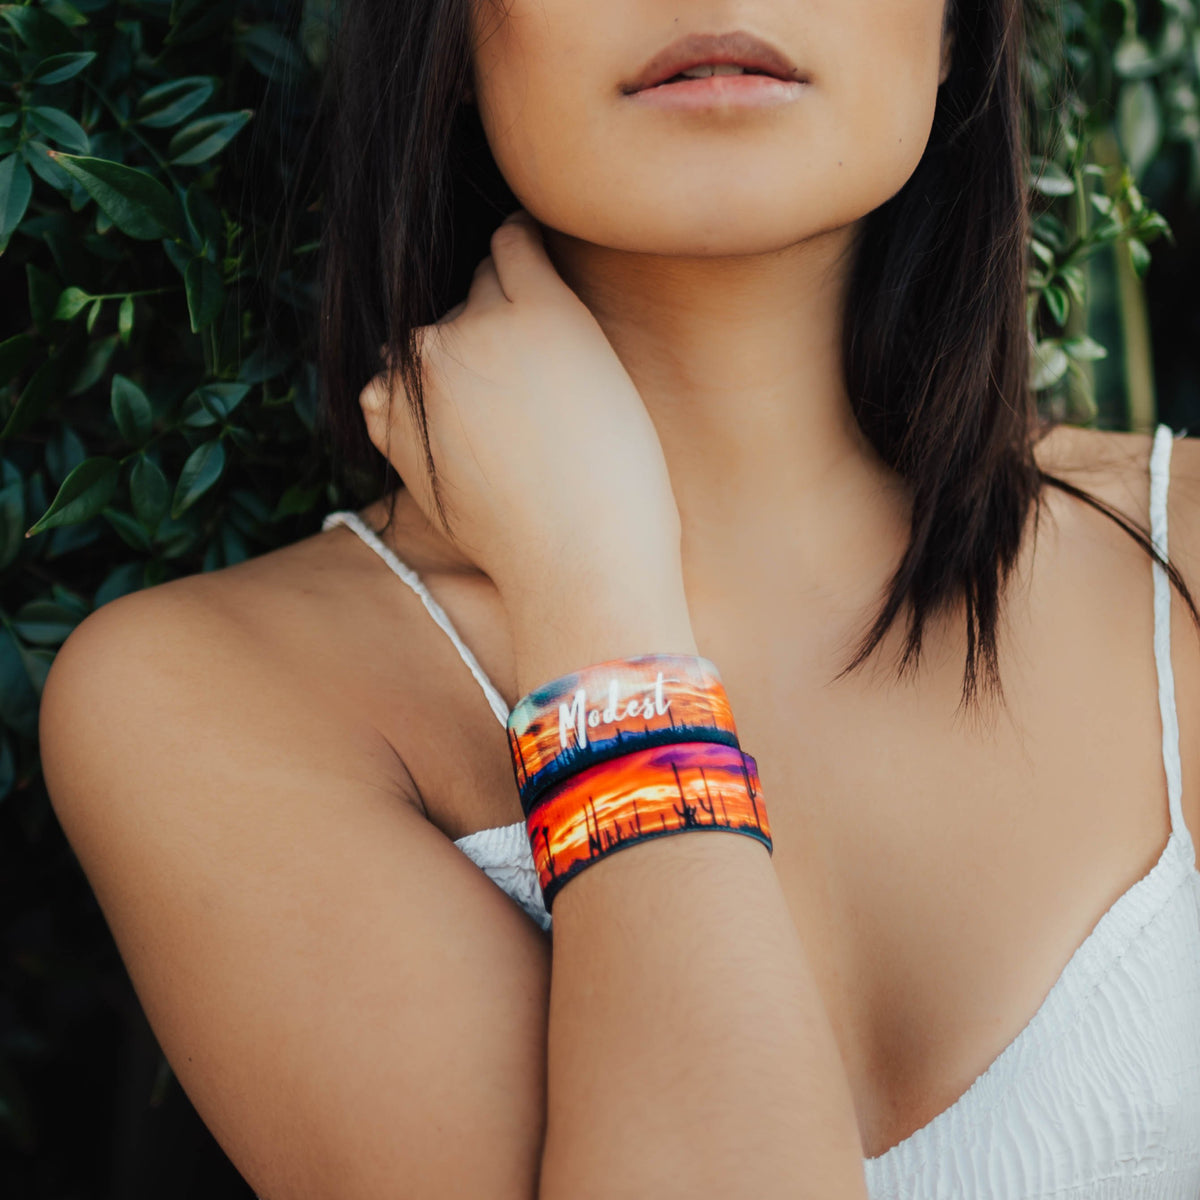 Modest-Sold Out-ZOX - This item is sold out and will not be restocked.